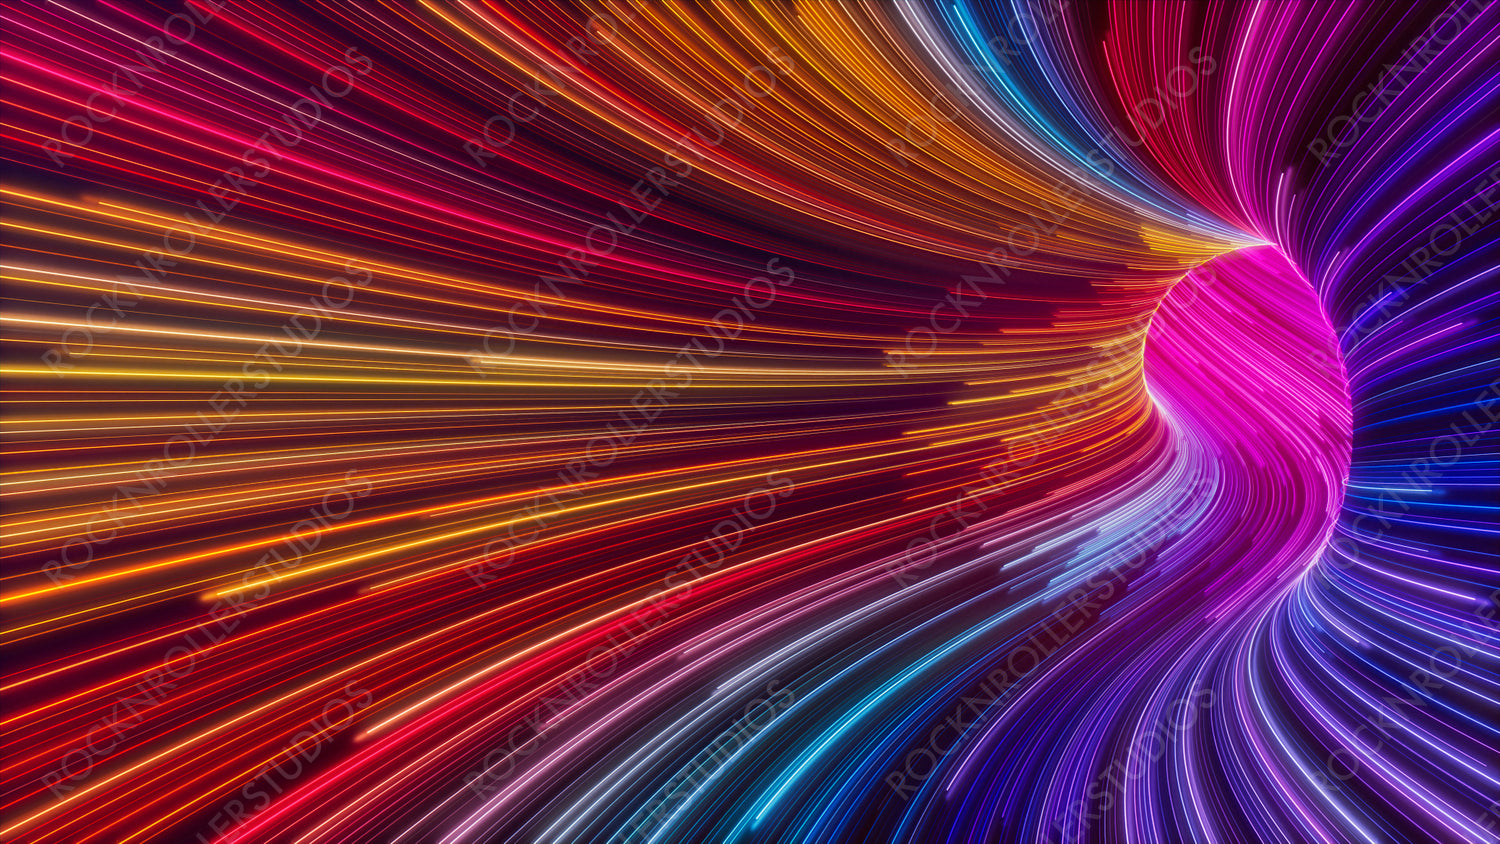 Wavy Neon Tunnel with Orange, Pink and Turquoise Streaks. 3D Render.